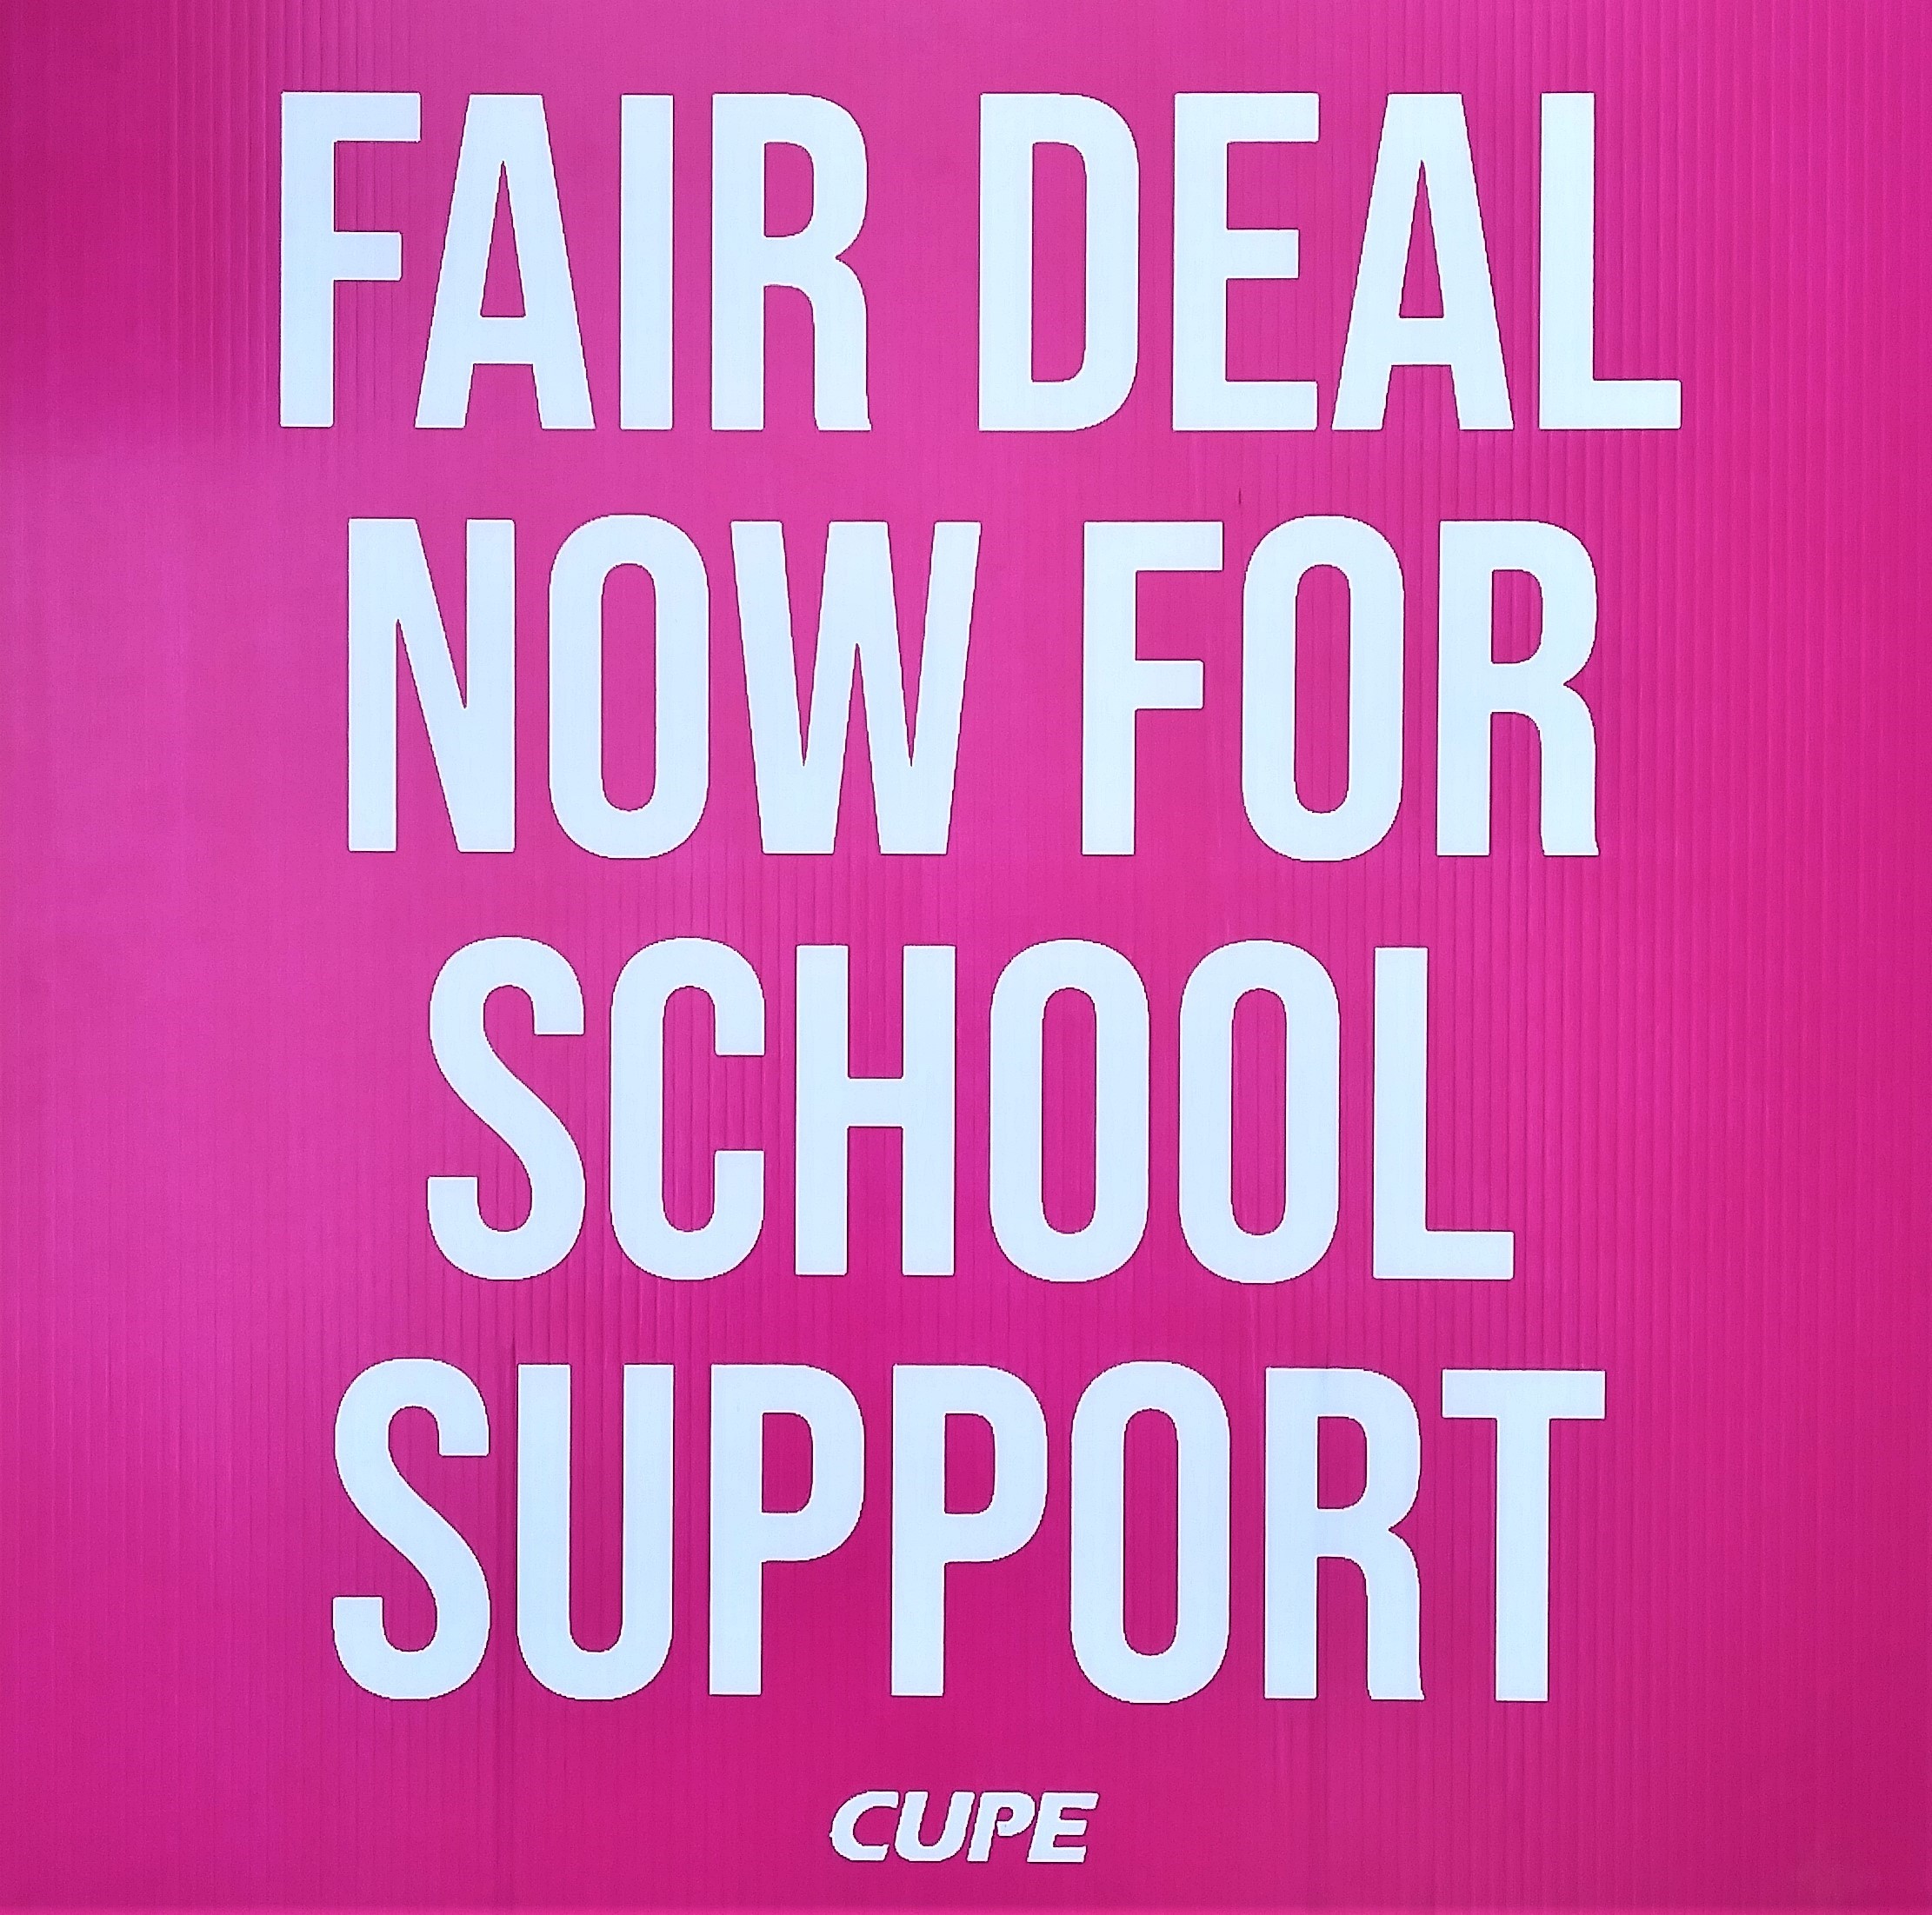 Fair deal now for school support message on a bright pink sign.